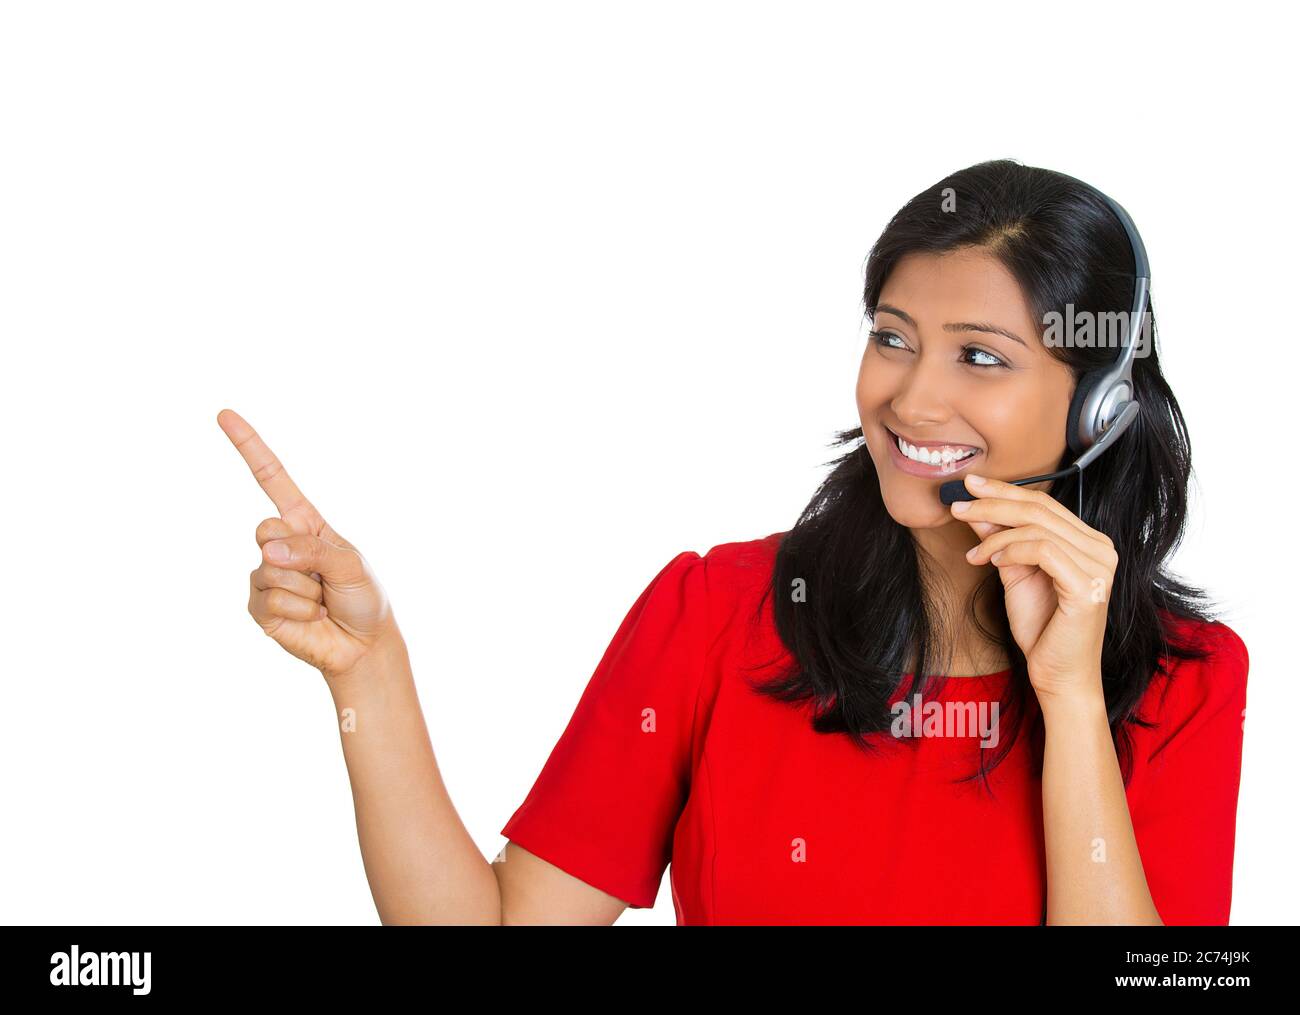 Closeup portrait of a smiling female customer representative with phone headset pointing at copy space isolated on white background. Stock Photo